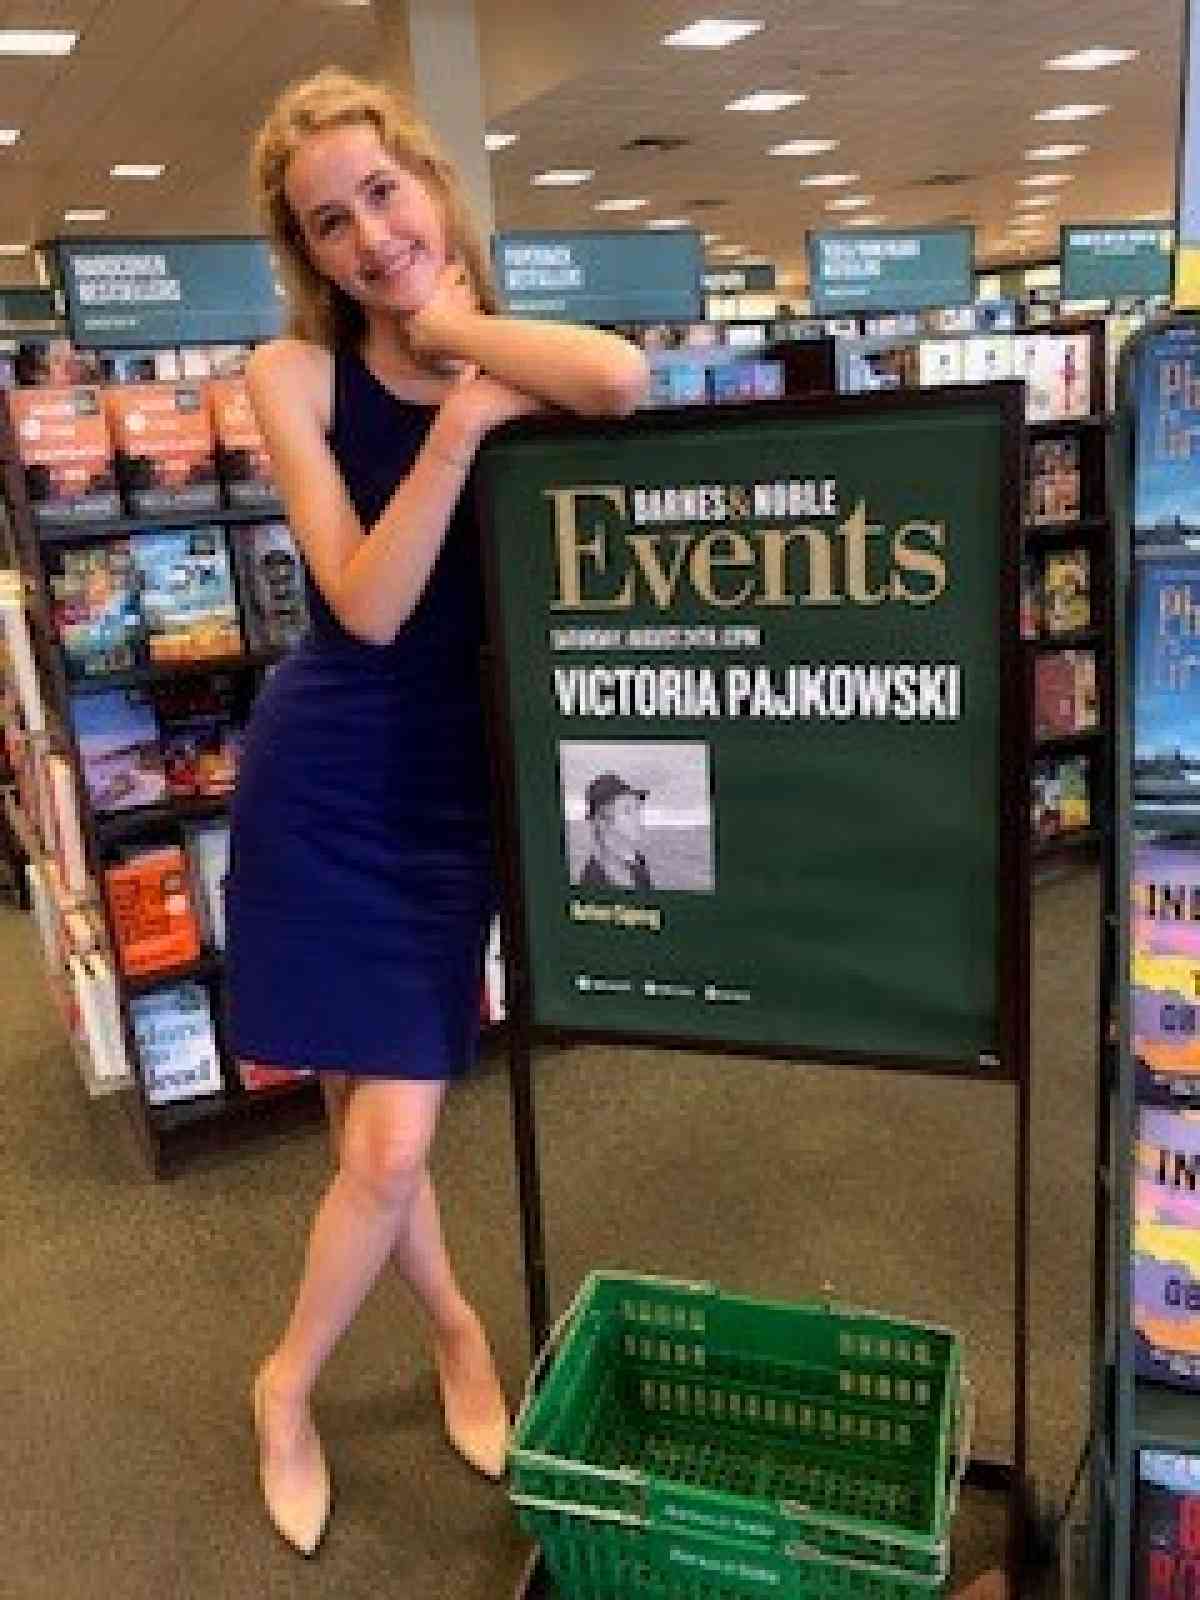 The-Gift-Victoria-Pajkowski-Book-Signing-Event-at-Barnes-and-Noble-Bookstore-Austin-Macauley-Publishers